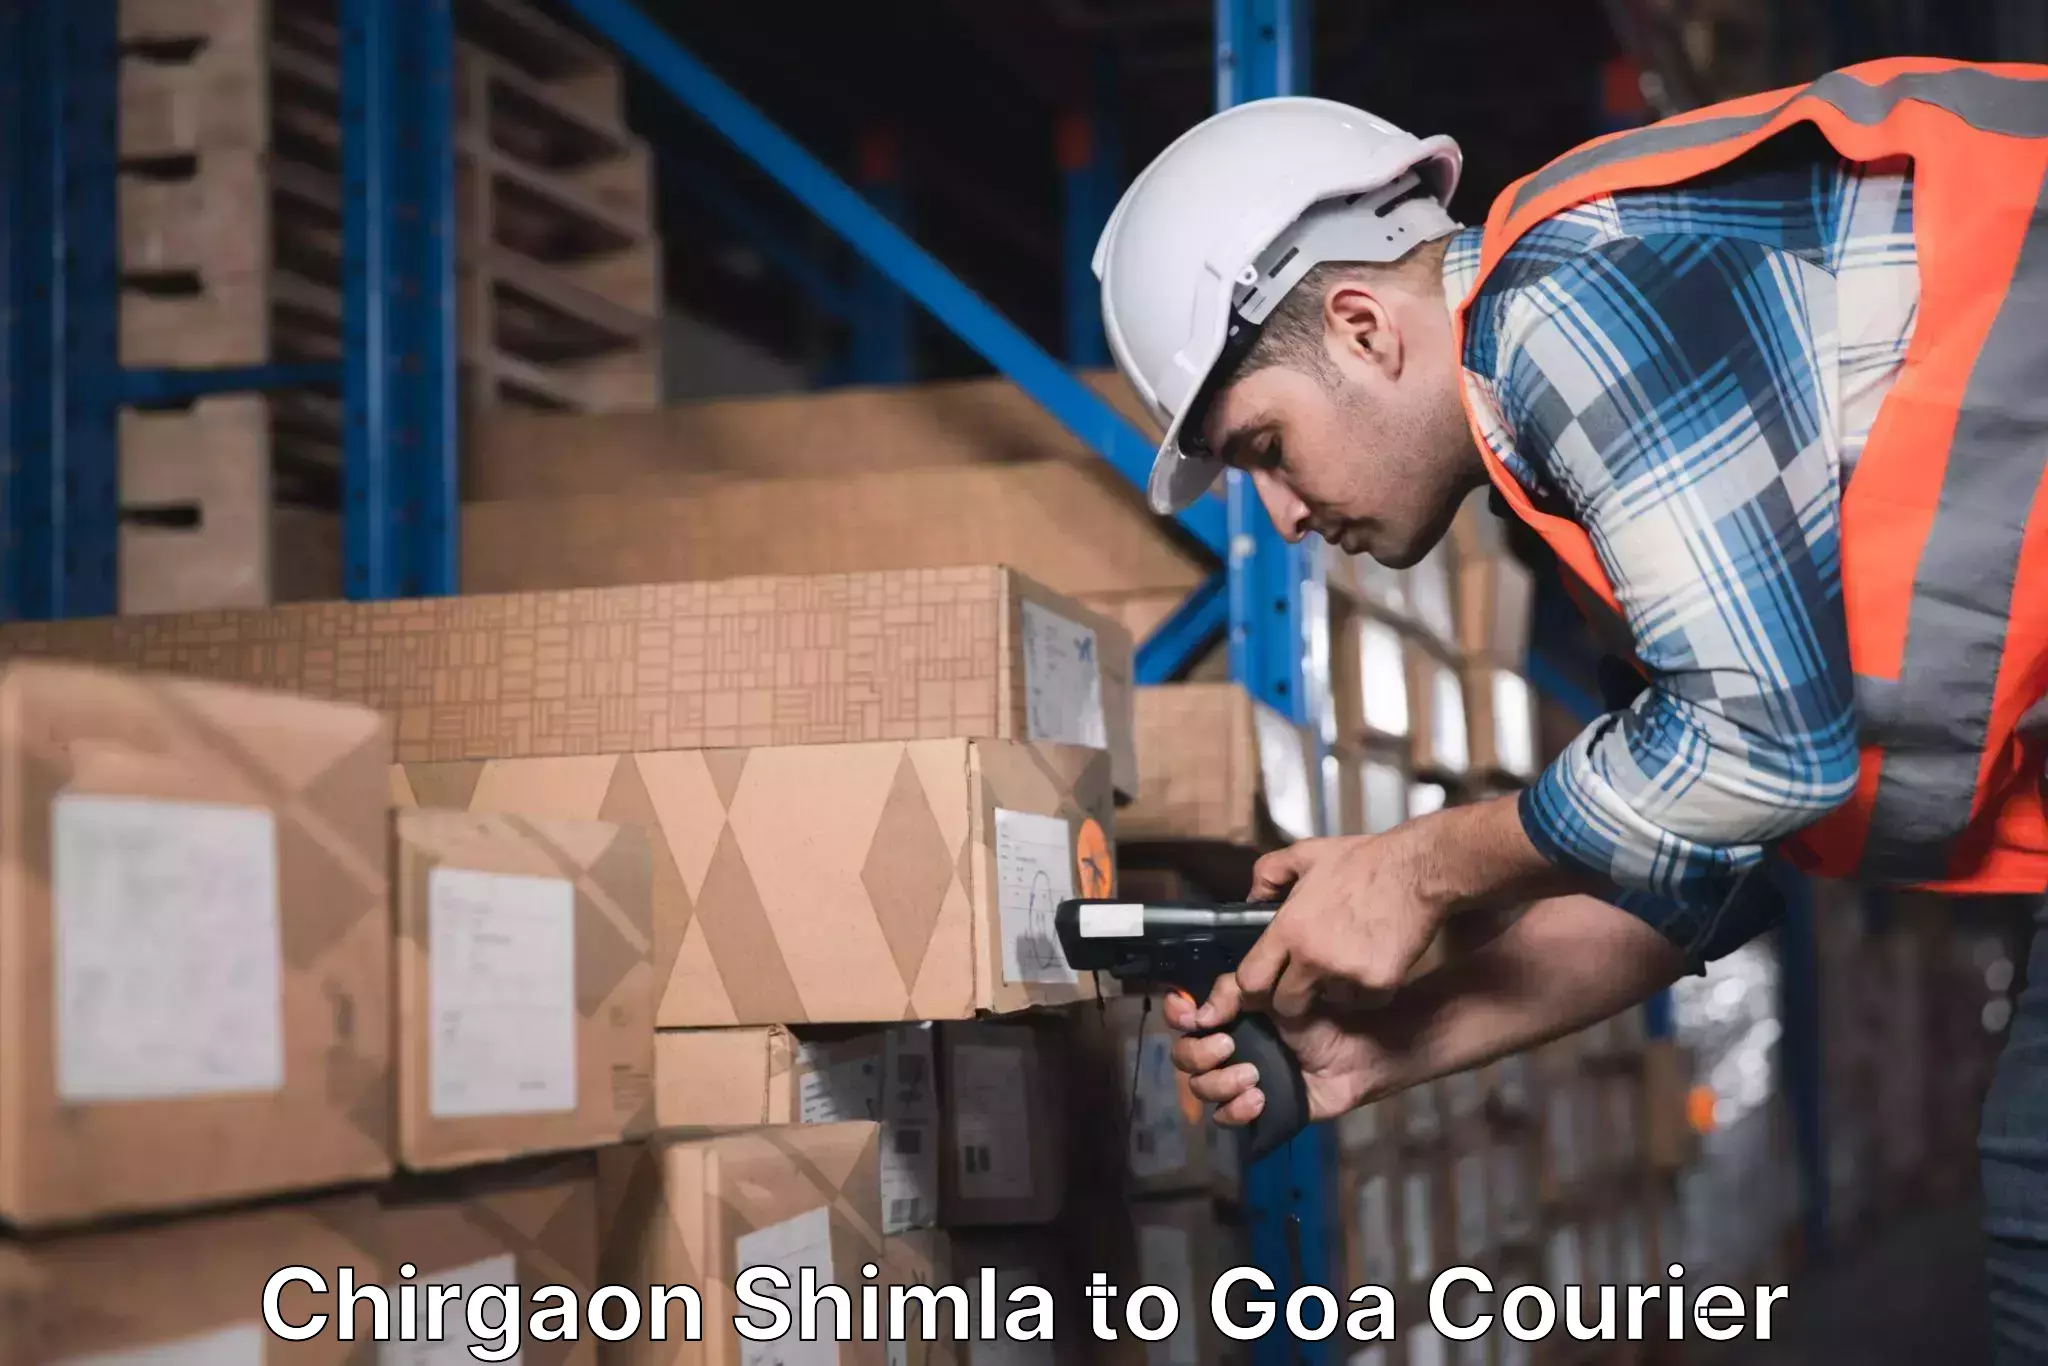 Specialized courier services Chirgaon Shimla to Goa